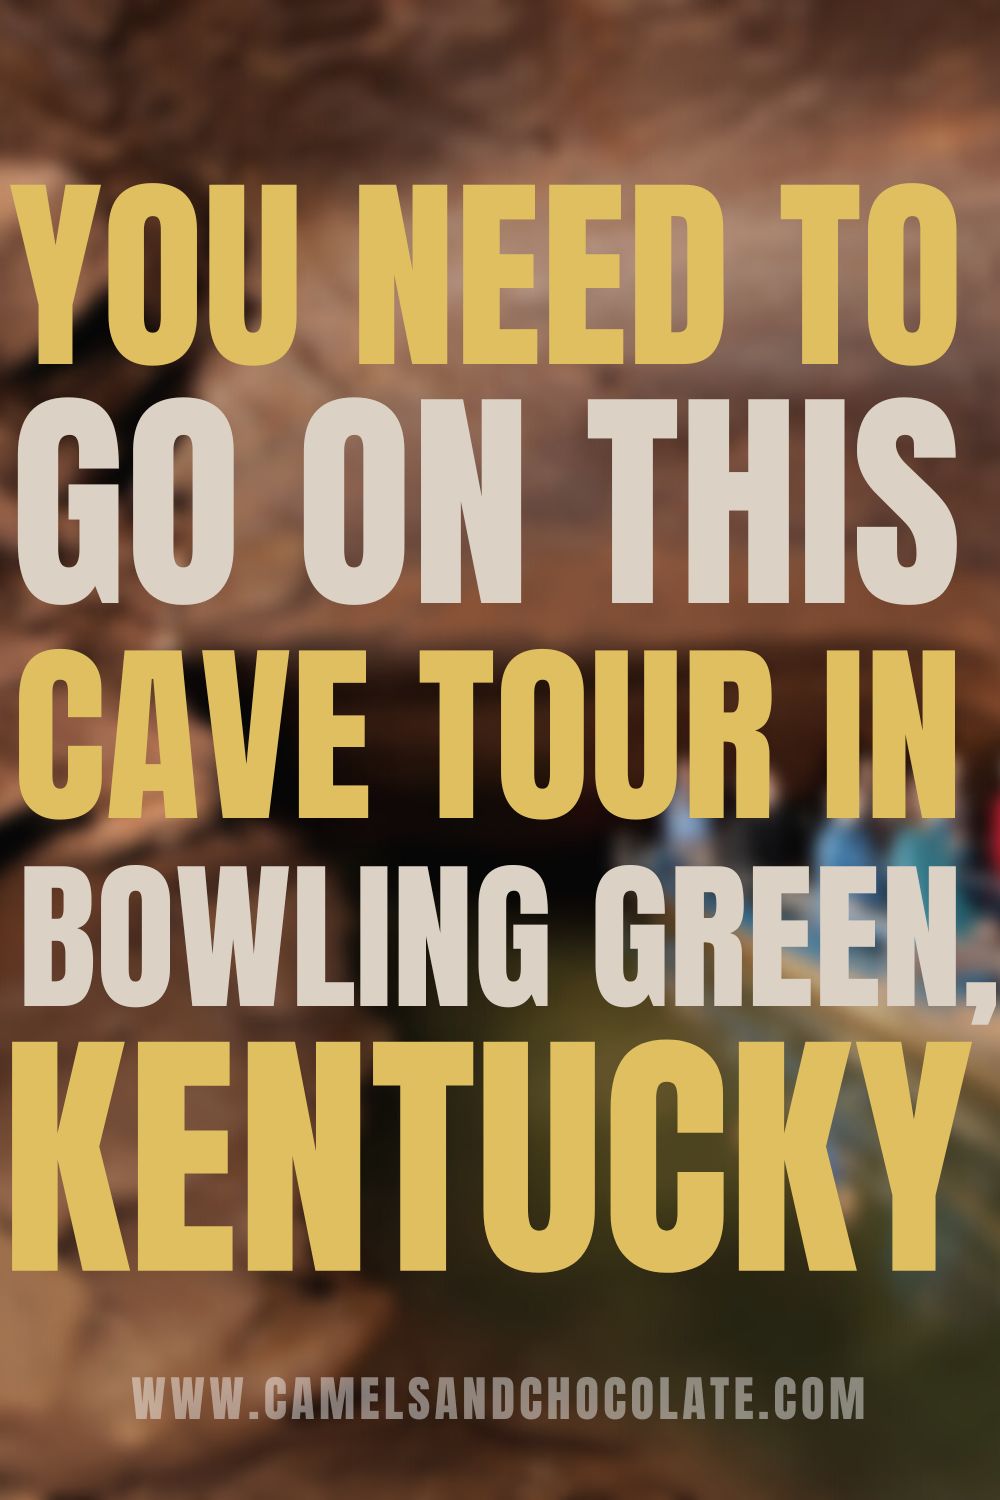 Tour Lost River Cave in Bowling Green, Kentucky